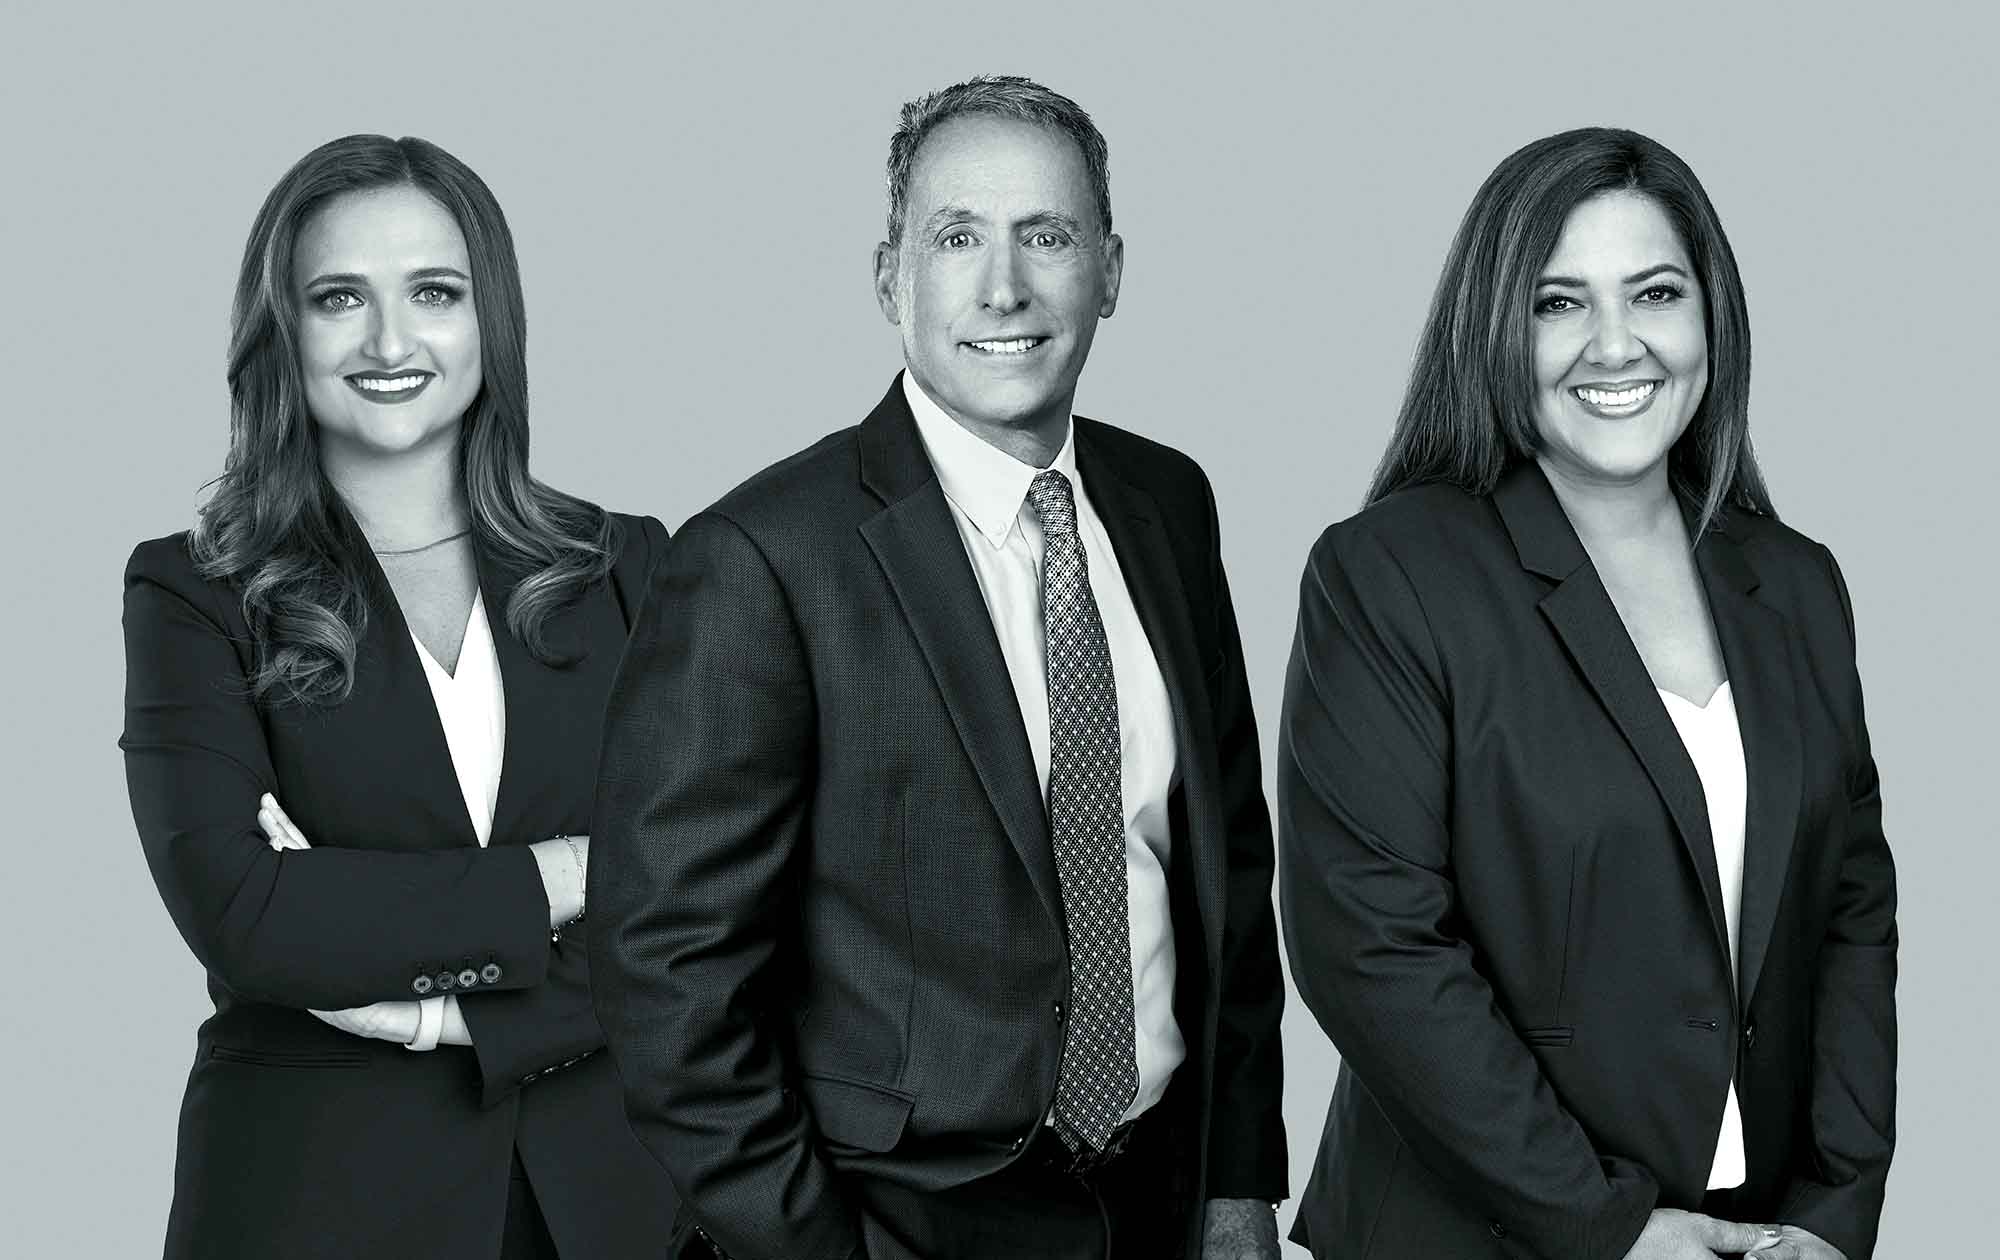 California pharmacist license defense attorneys Robert K. Weinberg, Suzanne Crouts, and Melissa DuChene represent pharmacist and pharmacy licensees in California with the Board of pharmacy and Department of Consumer Affairs.